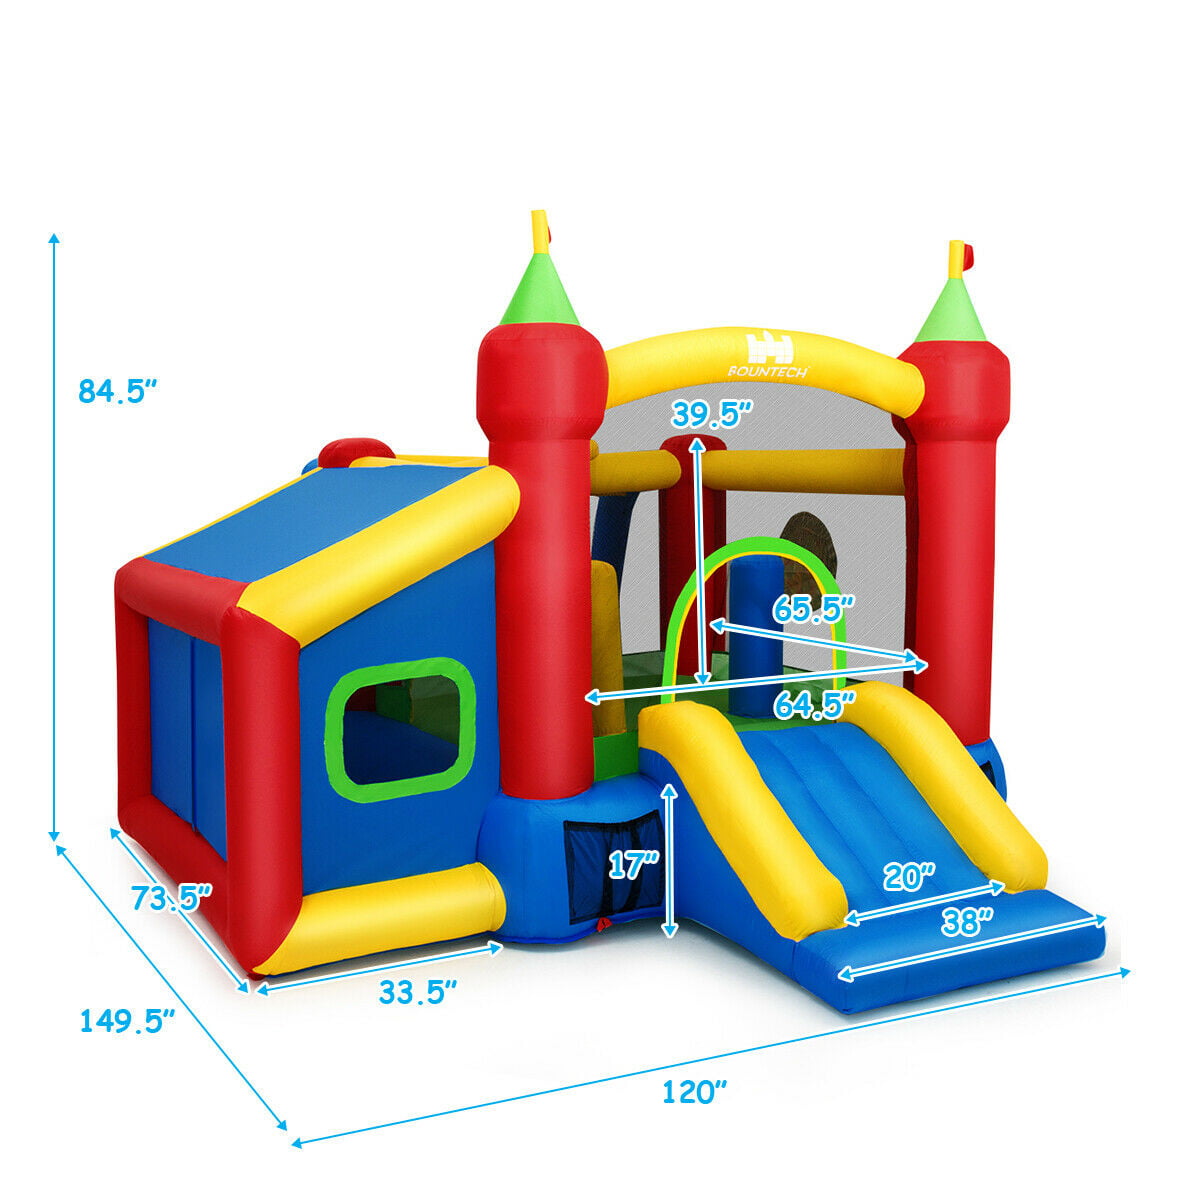 YARD Bounce House with Ball Pit Slide Blower Kids Indoor Outdoor Inflatable Bouncer Jump Castle 